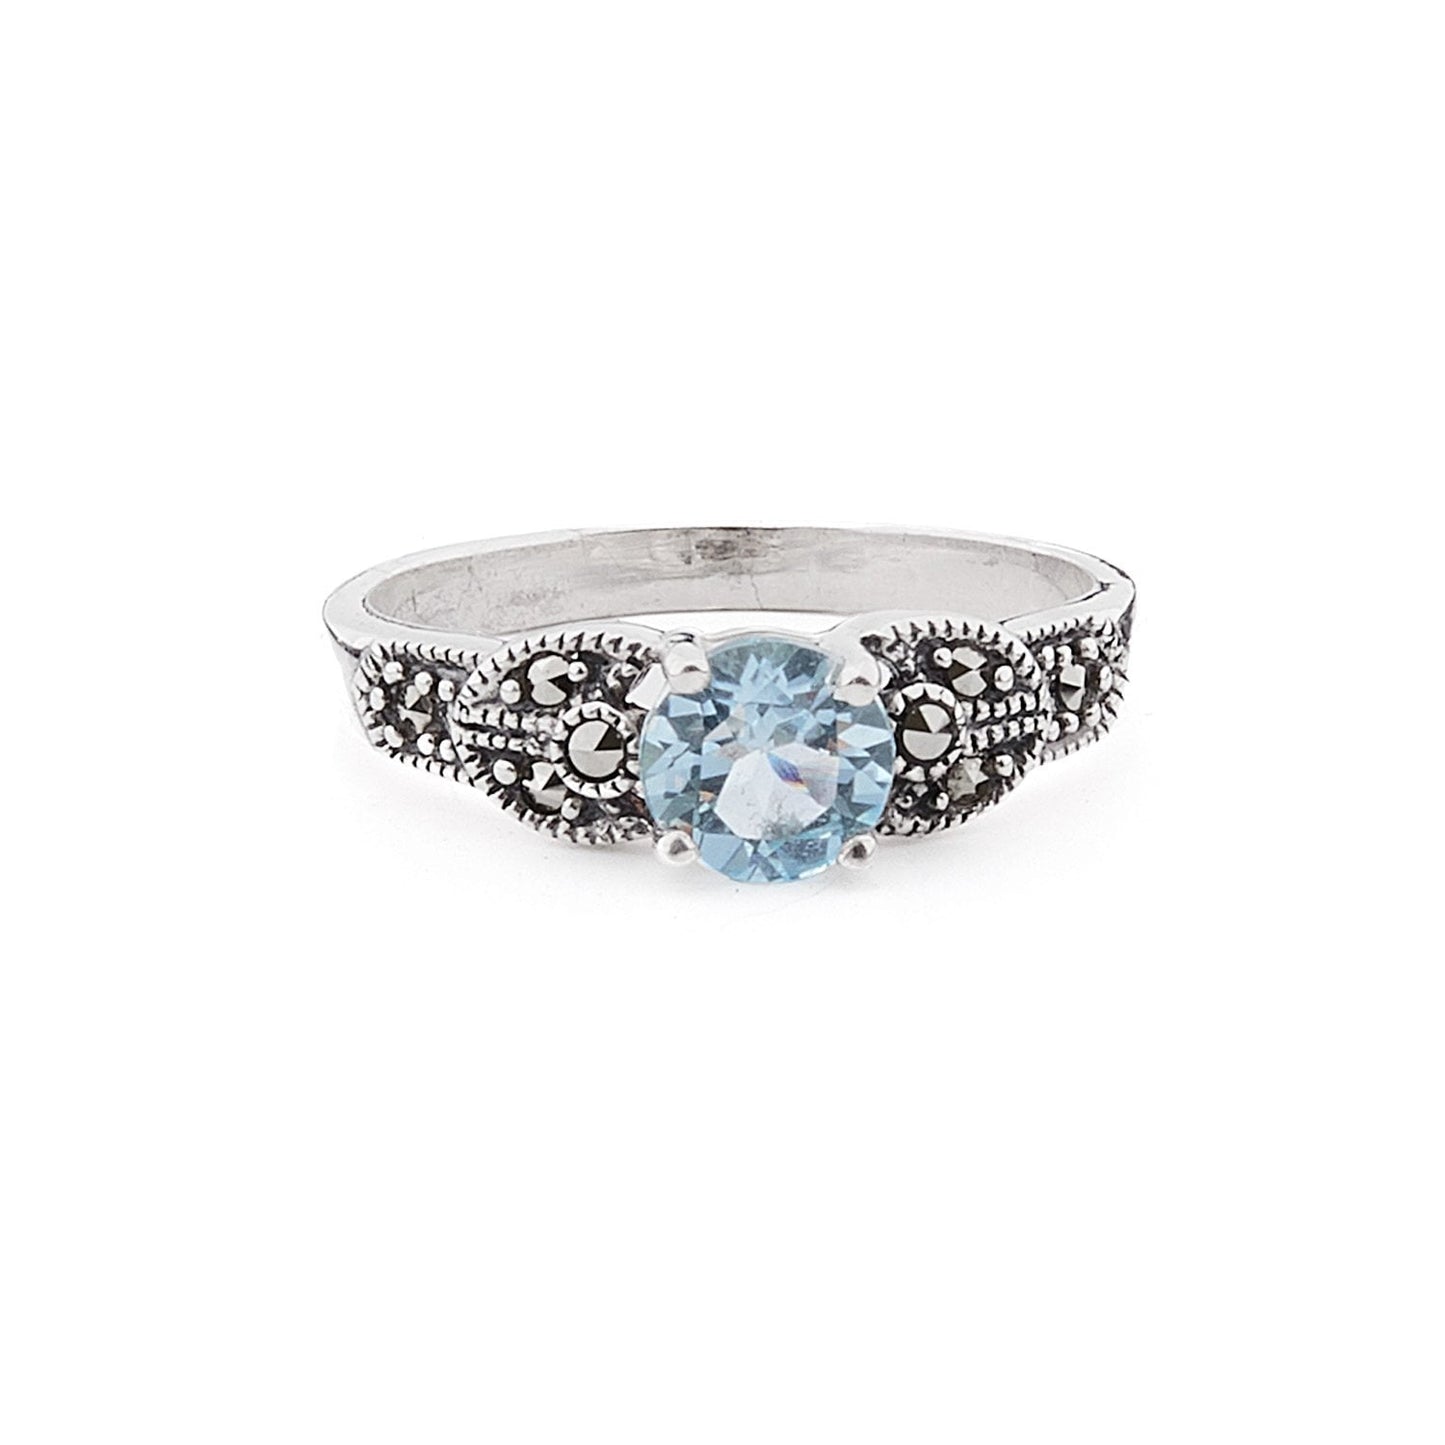 Art Deco Style Ring: Sterling Silver, Marcasite, Blue Topaz